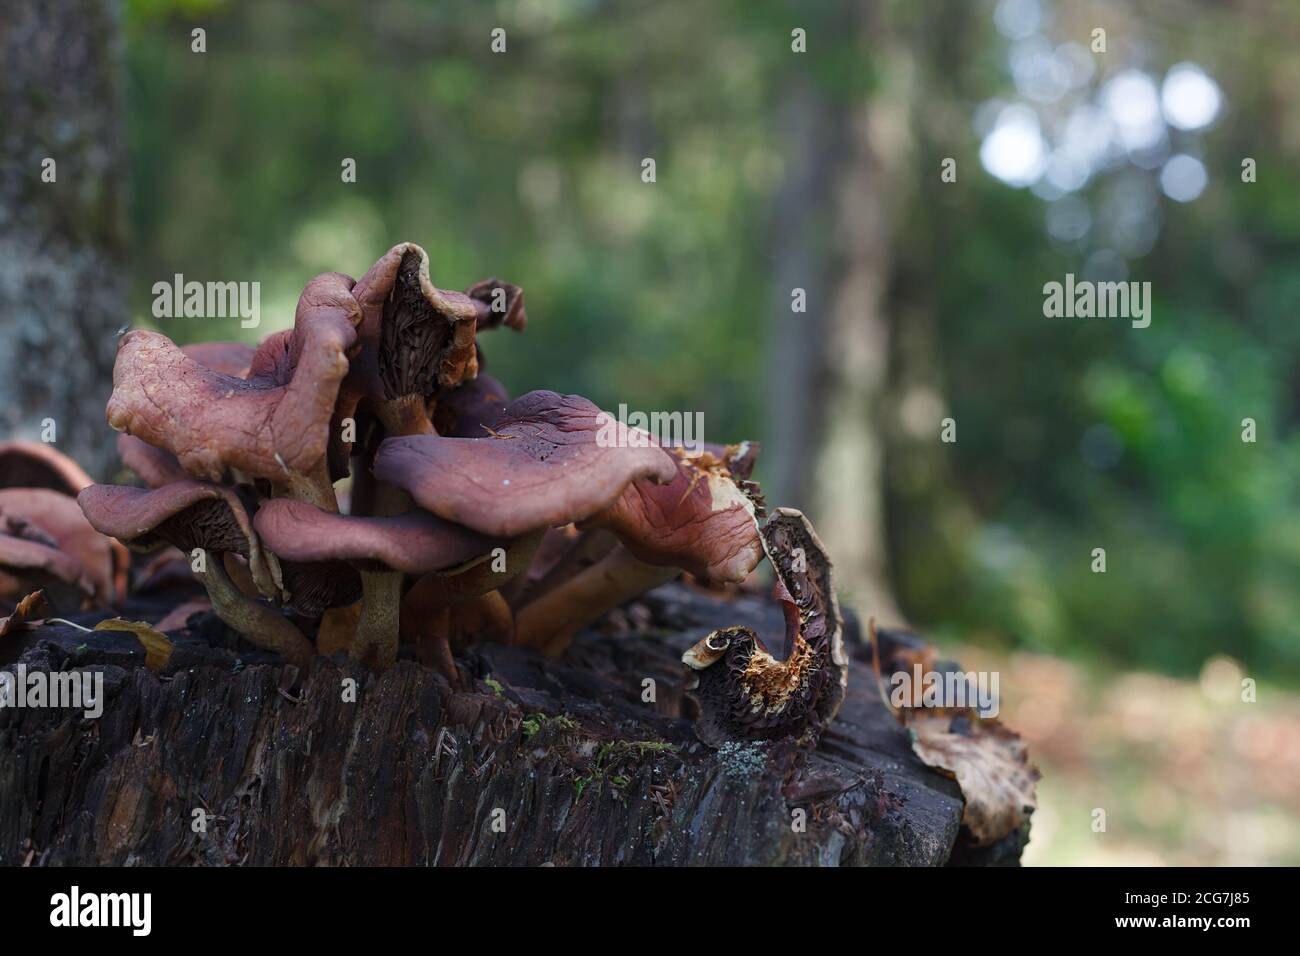 Mushrooms growing on a stump close up, collecting mushrooms in a forest, selective focus, Stock Photo